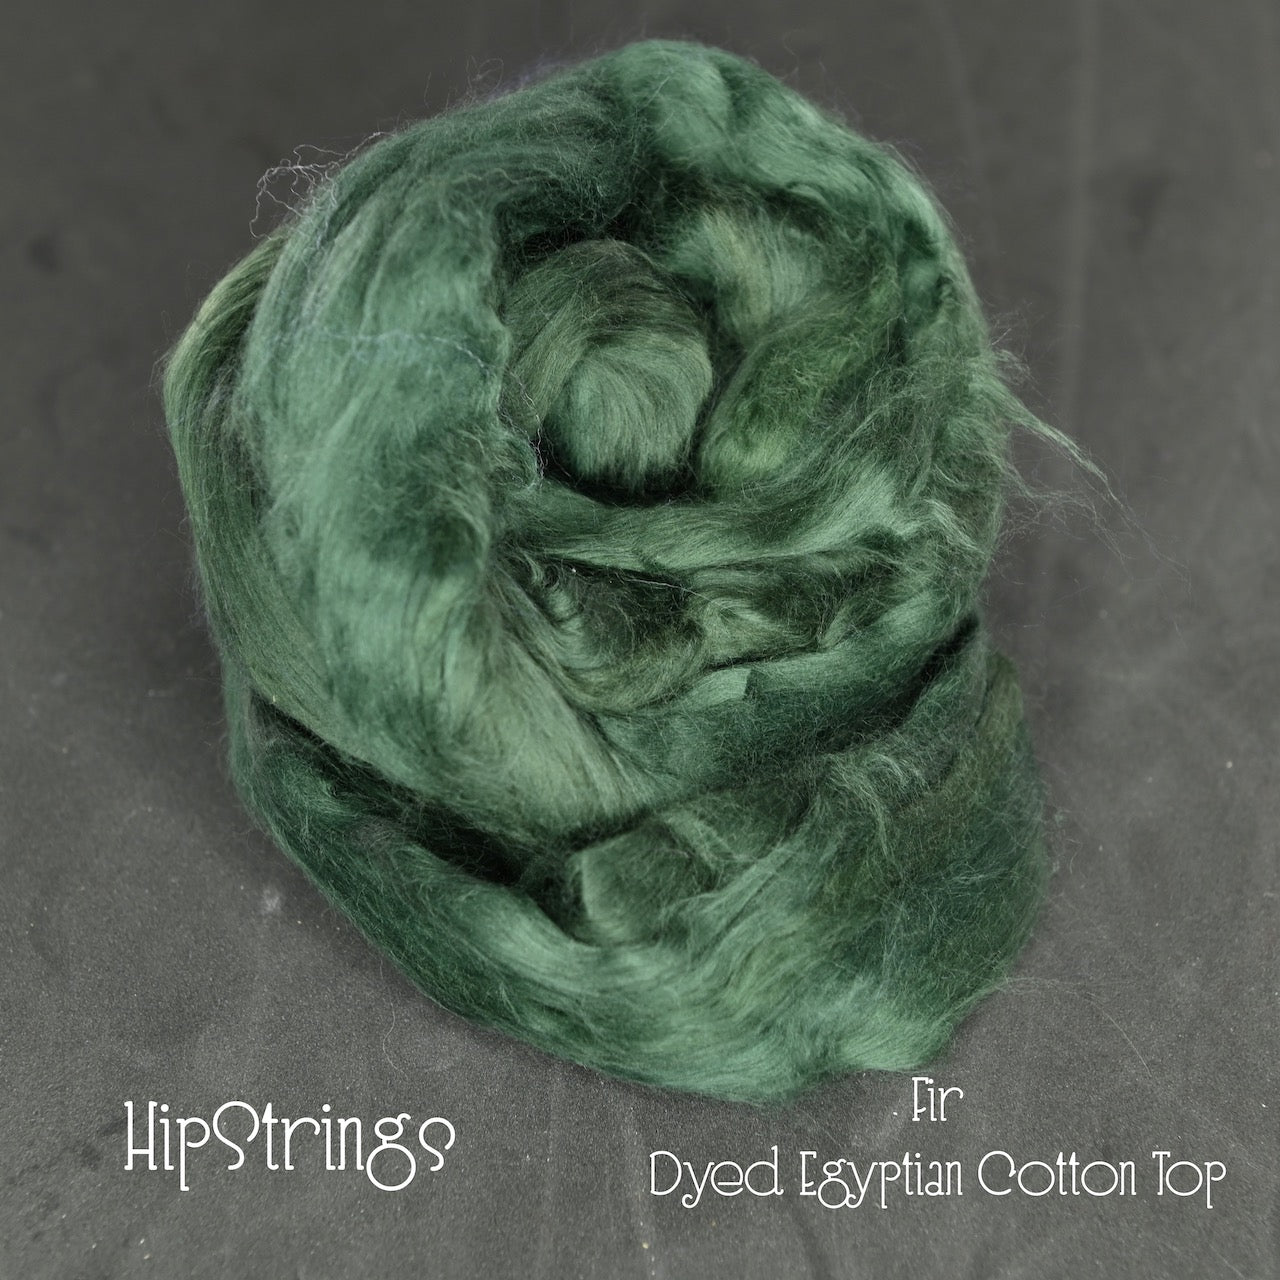 Dyed Egyptian Cotton Combed Top - 1 oz